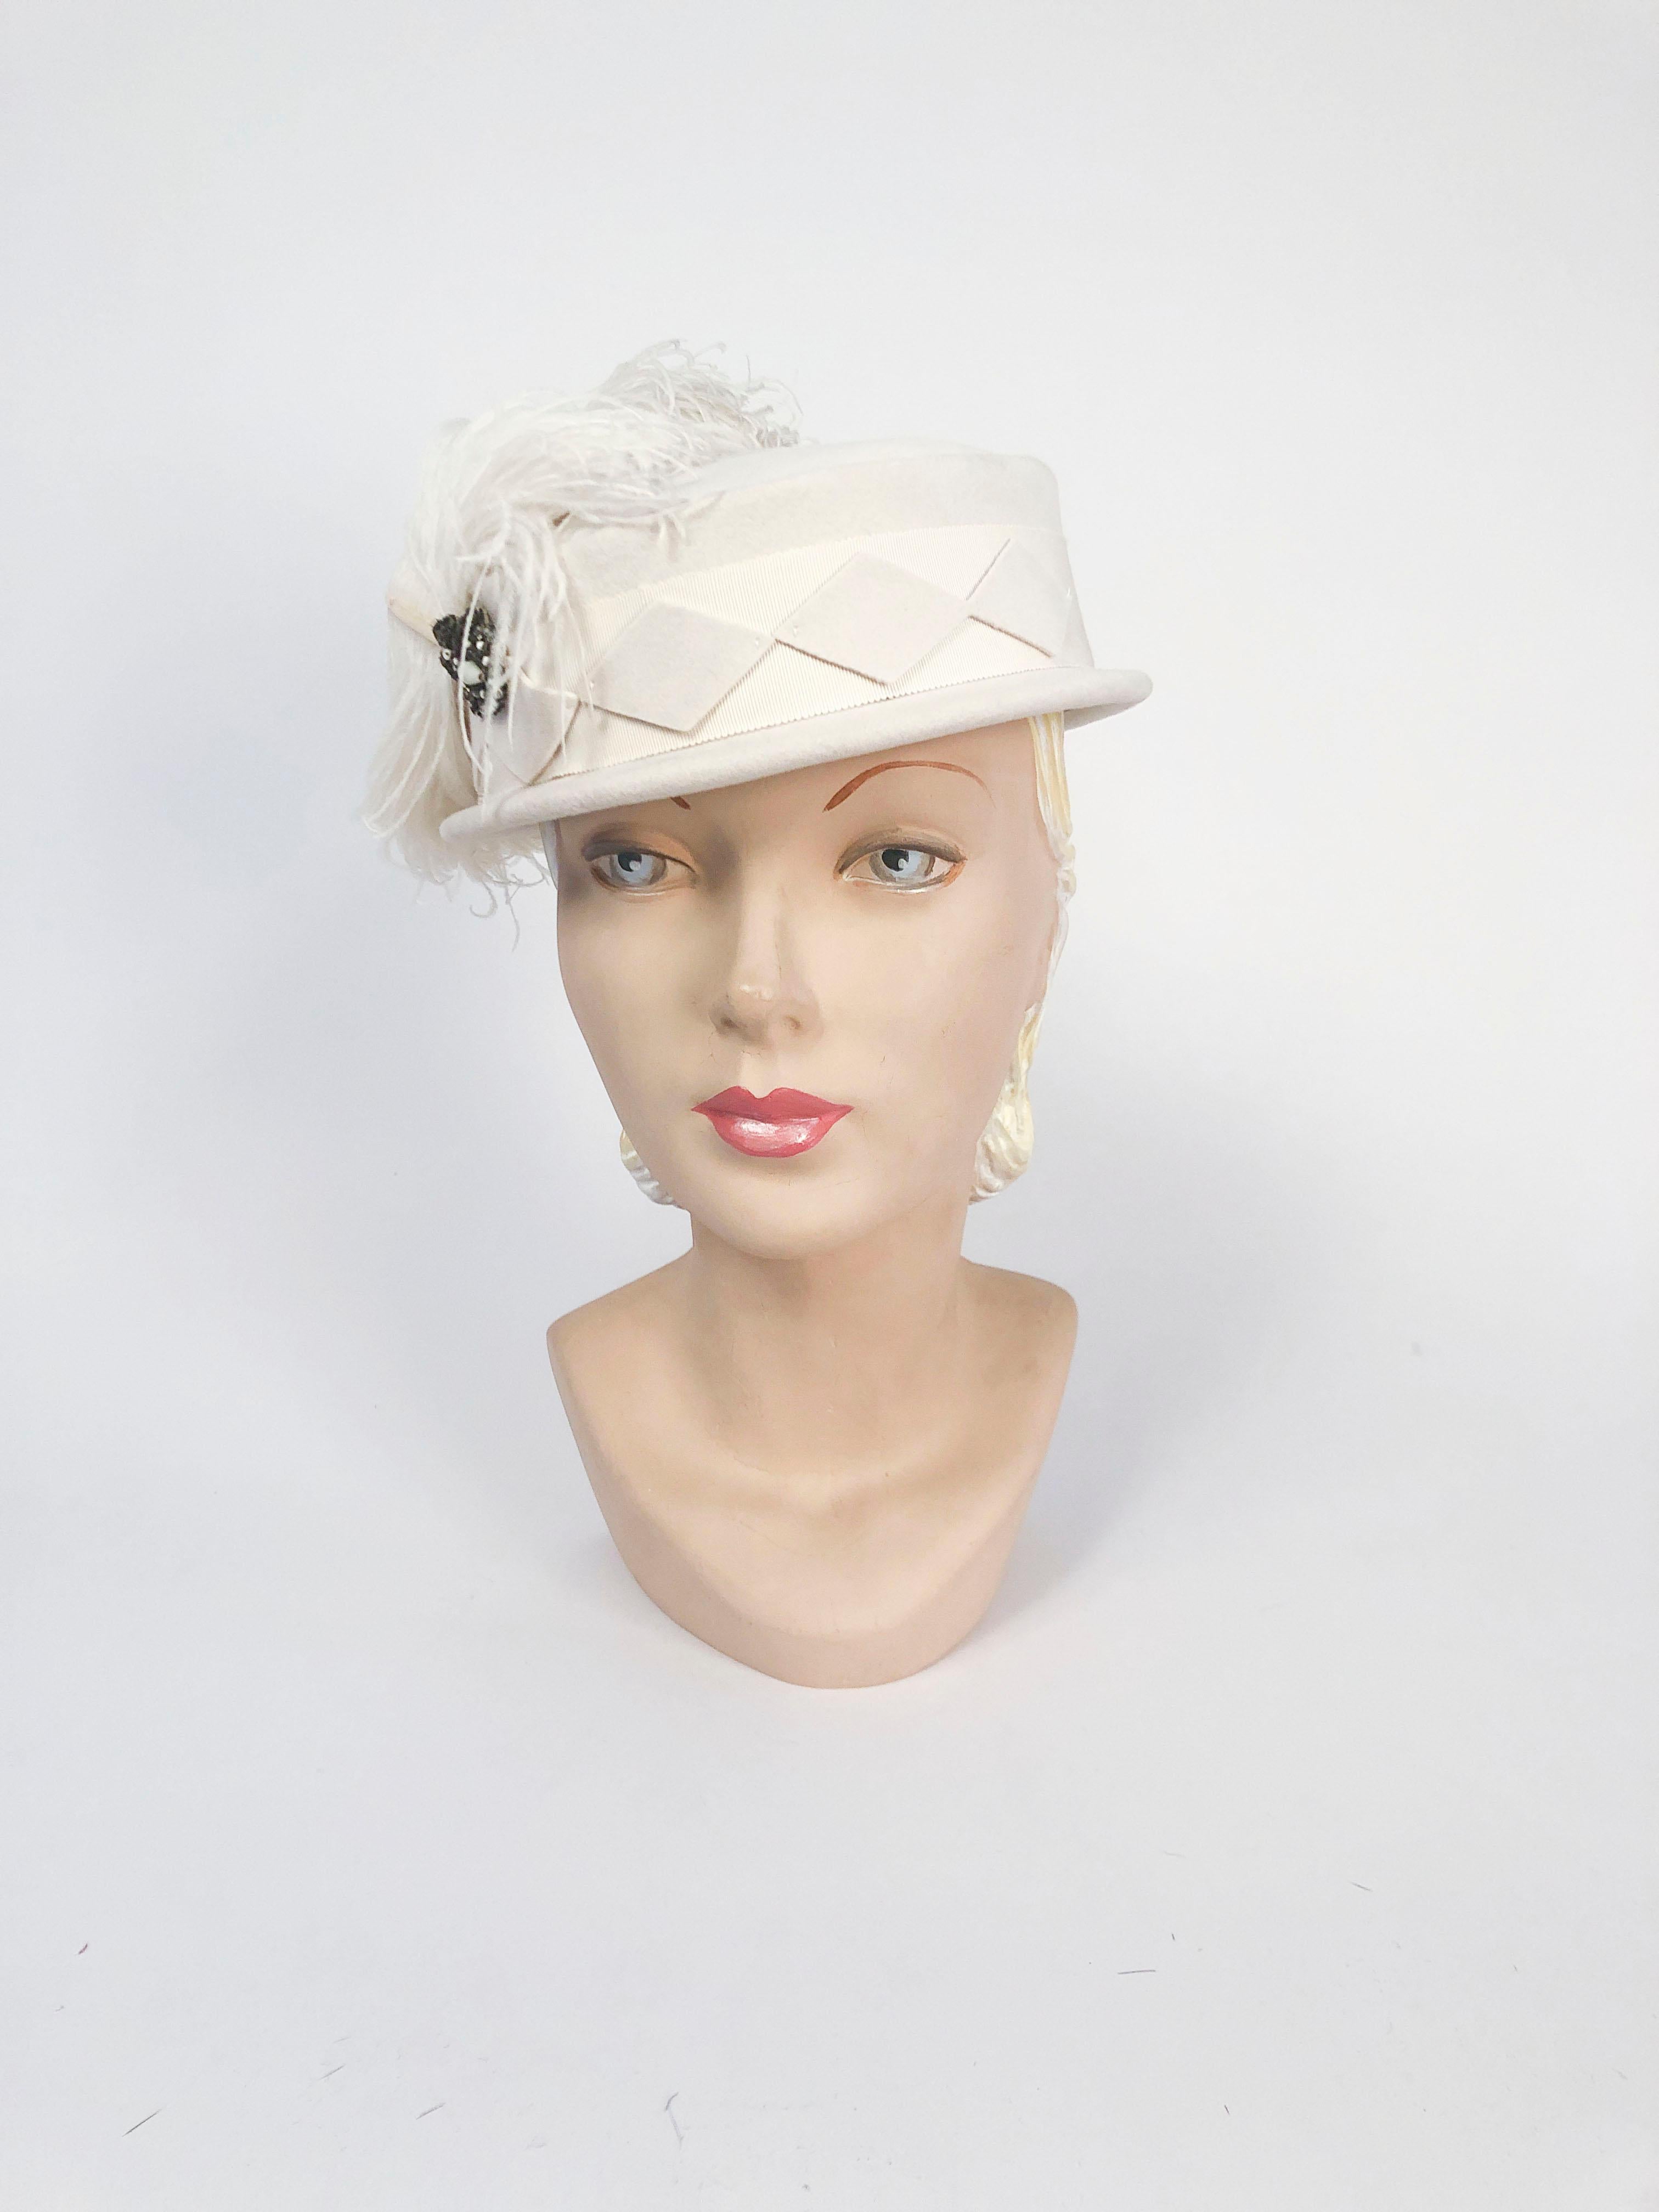 1940s Cream Fur Felt Hat with Wide Hat Band made of gros-grain, Diamond Applique along the band and hand-curled Feather that is large. The feather is held onto the hat with a metallic and glass beaded accent piece.